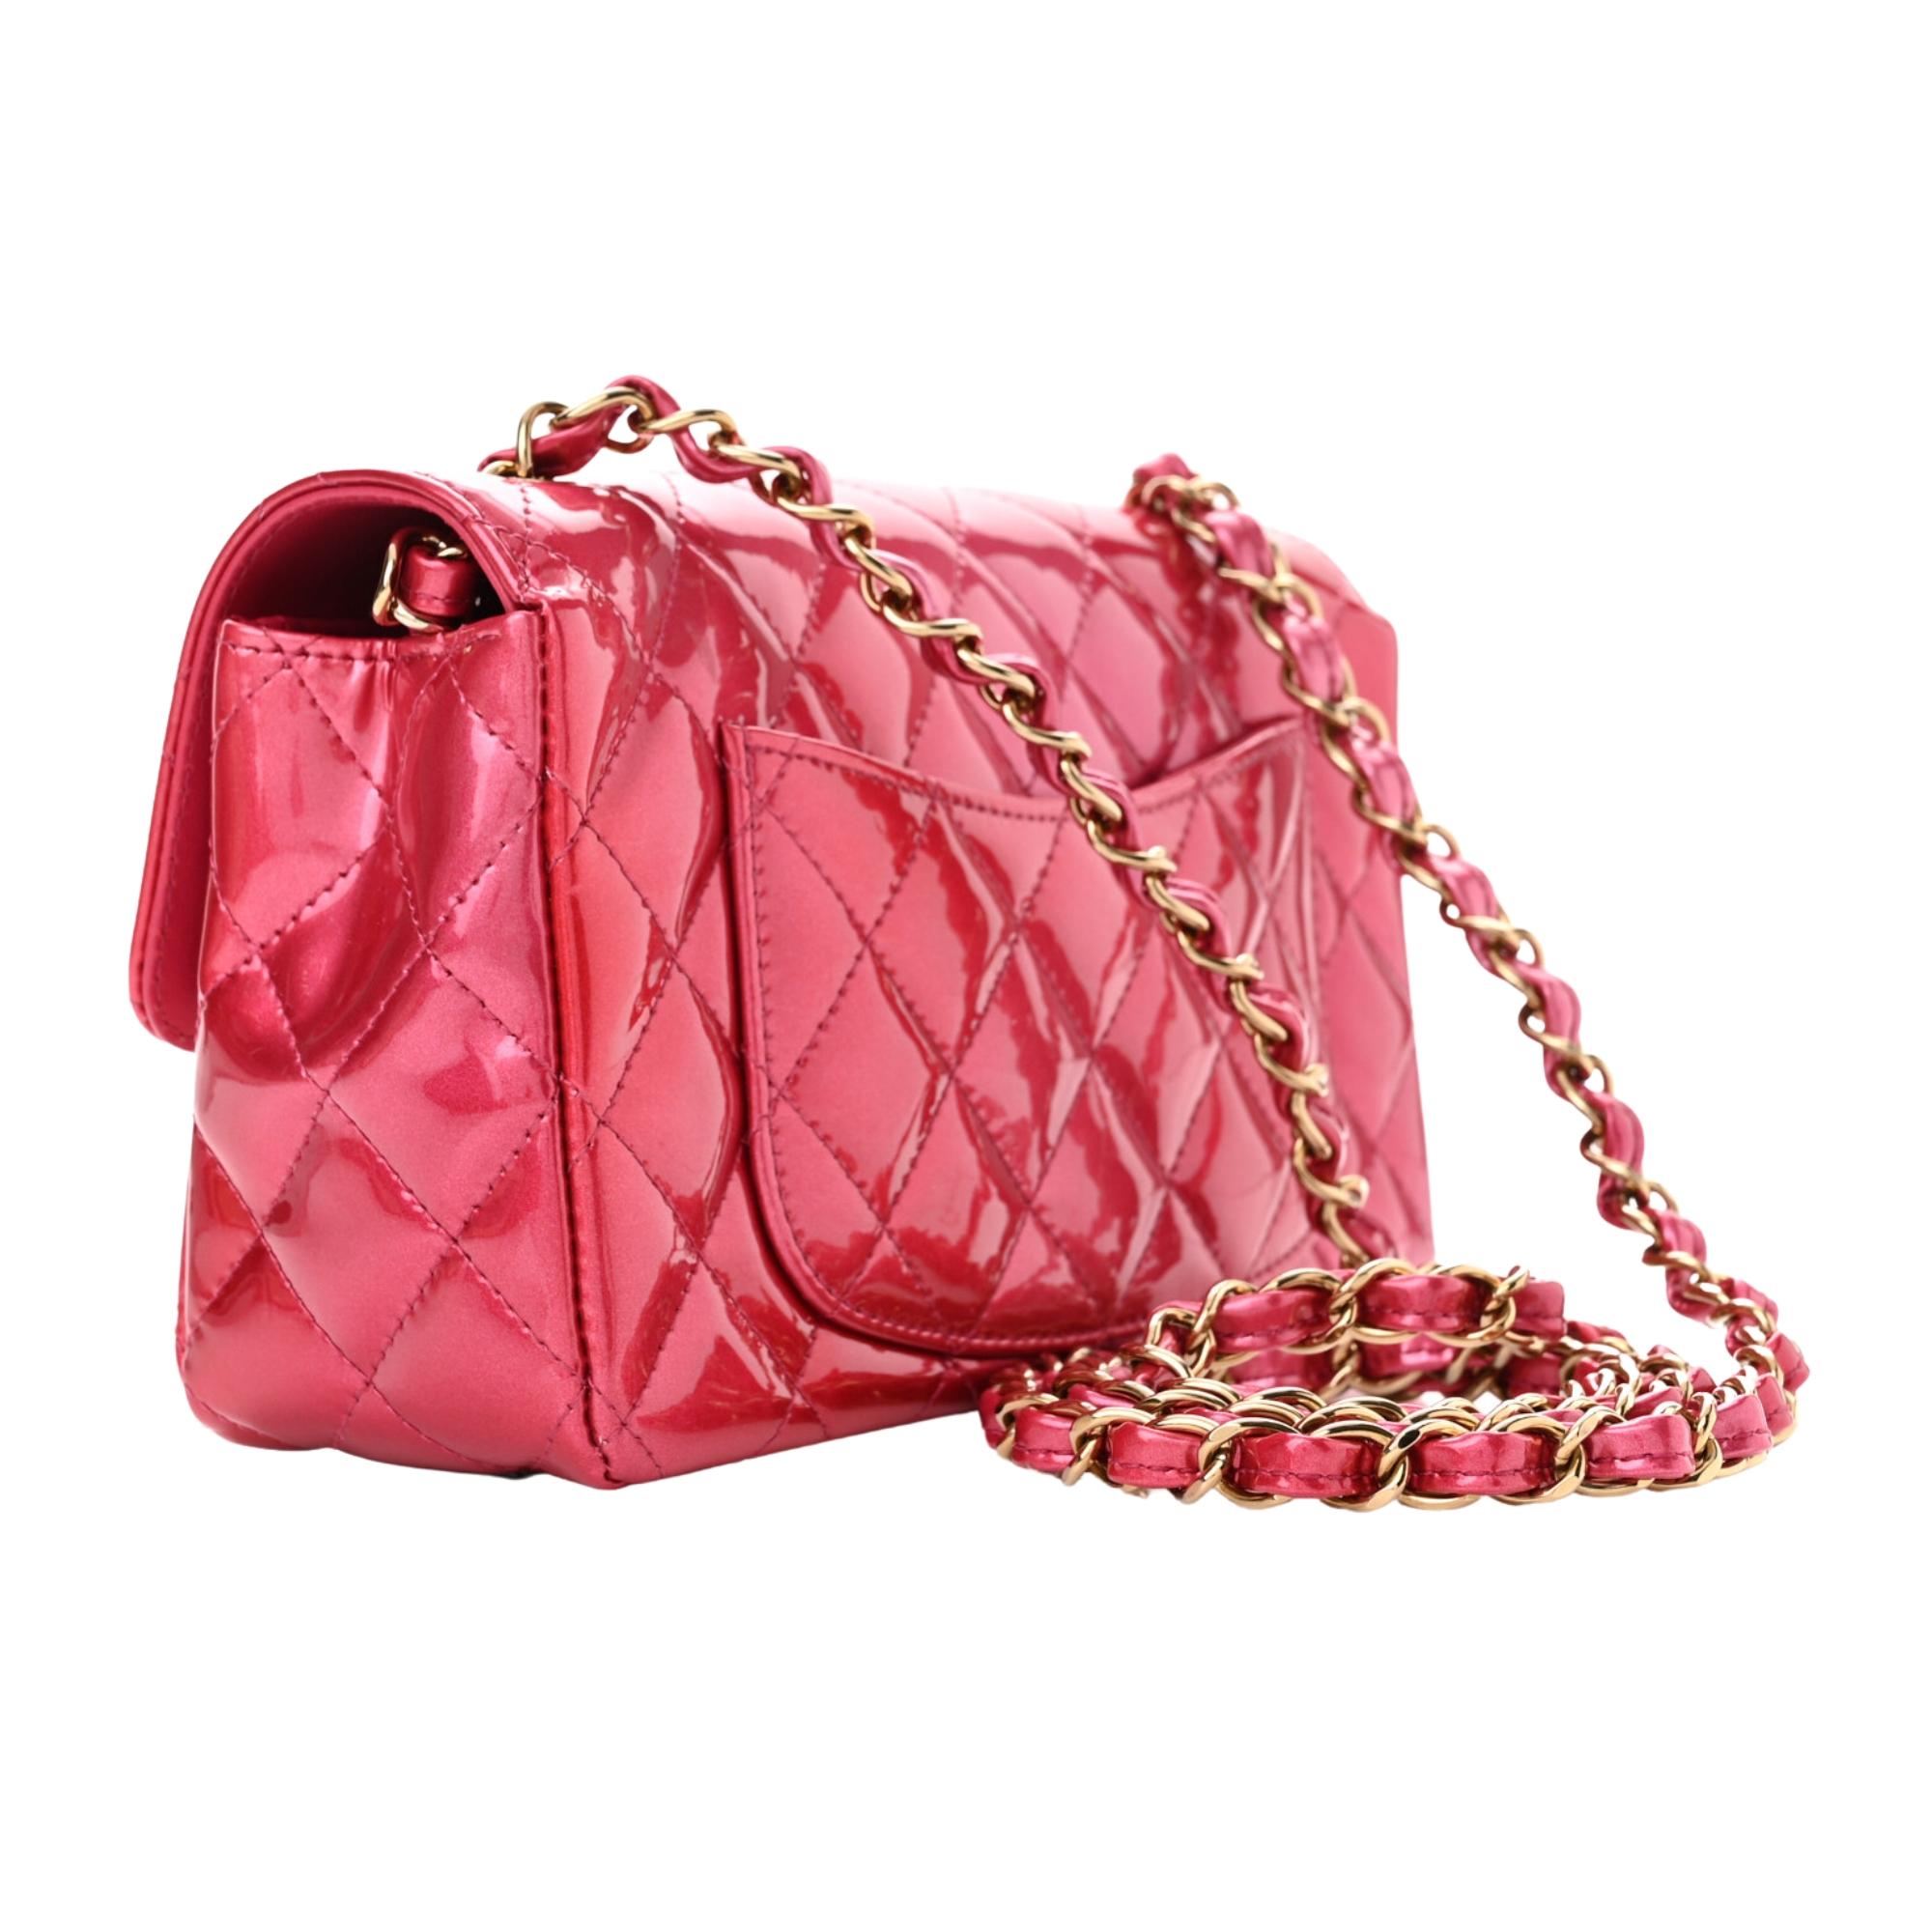 This bag is made out of luxurious diamond quilted iridescent patent leather in gradient pink. The bag features a crossbody leather threaded gold chain link shoulder strap, a frontal flap, and a gold Chanel CC turn lock. This opens to a pink interior